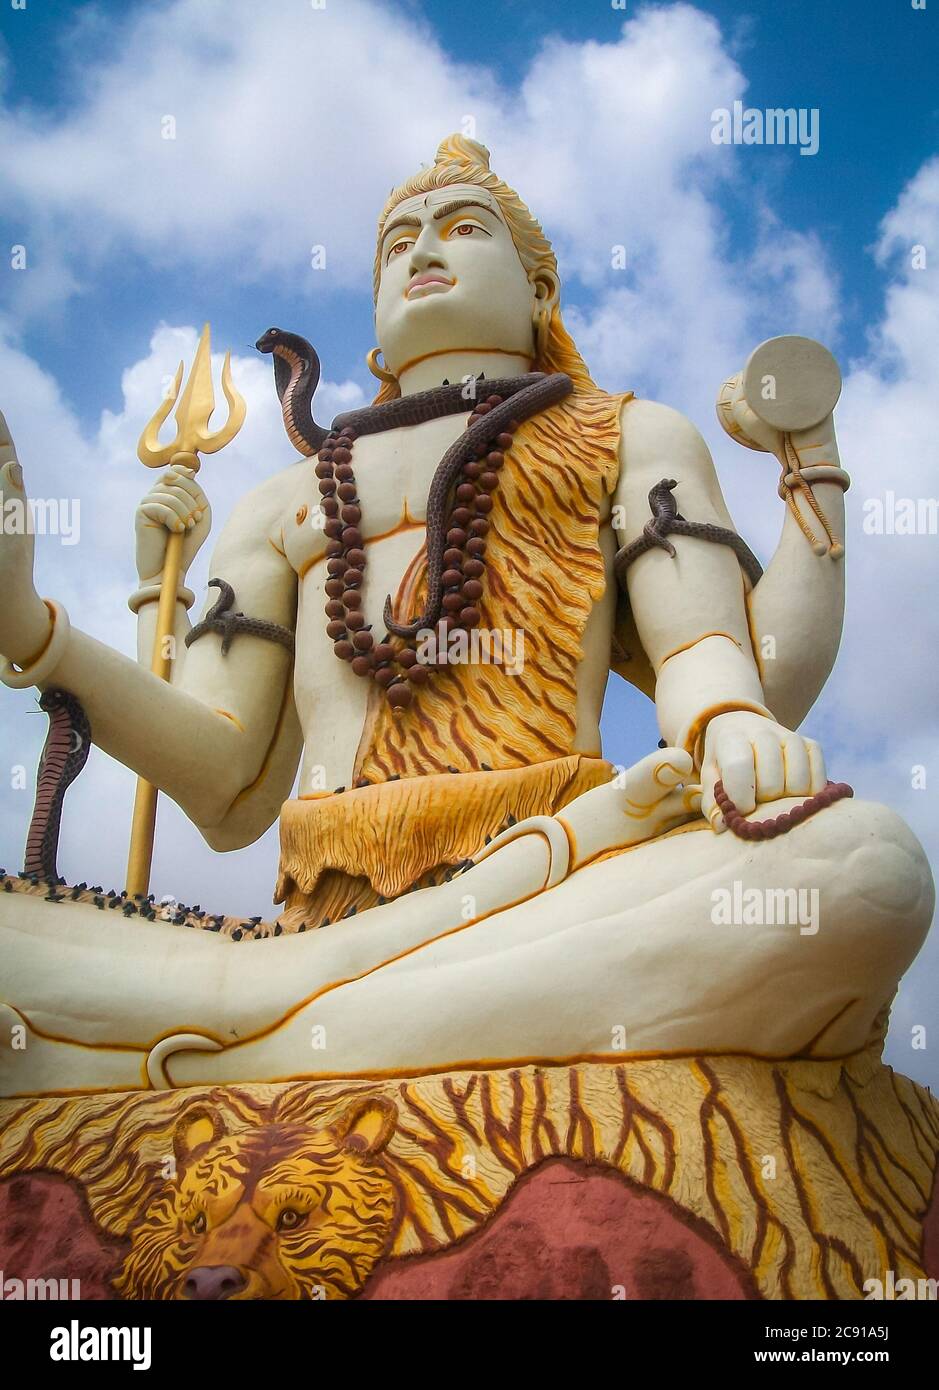 Statue Of Lord Shiva In India. Stock Photo